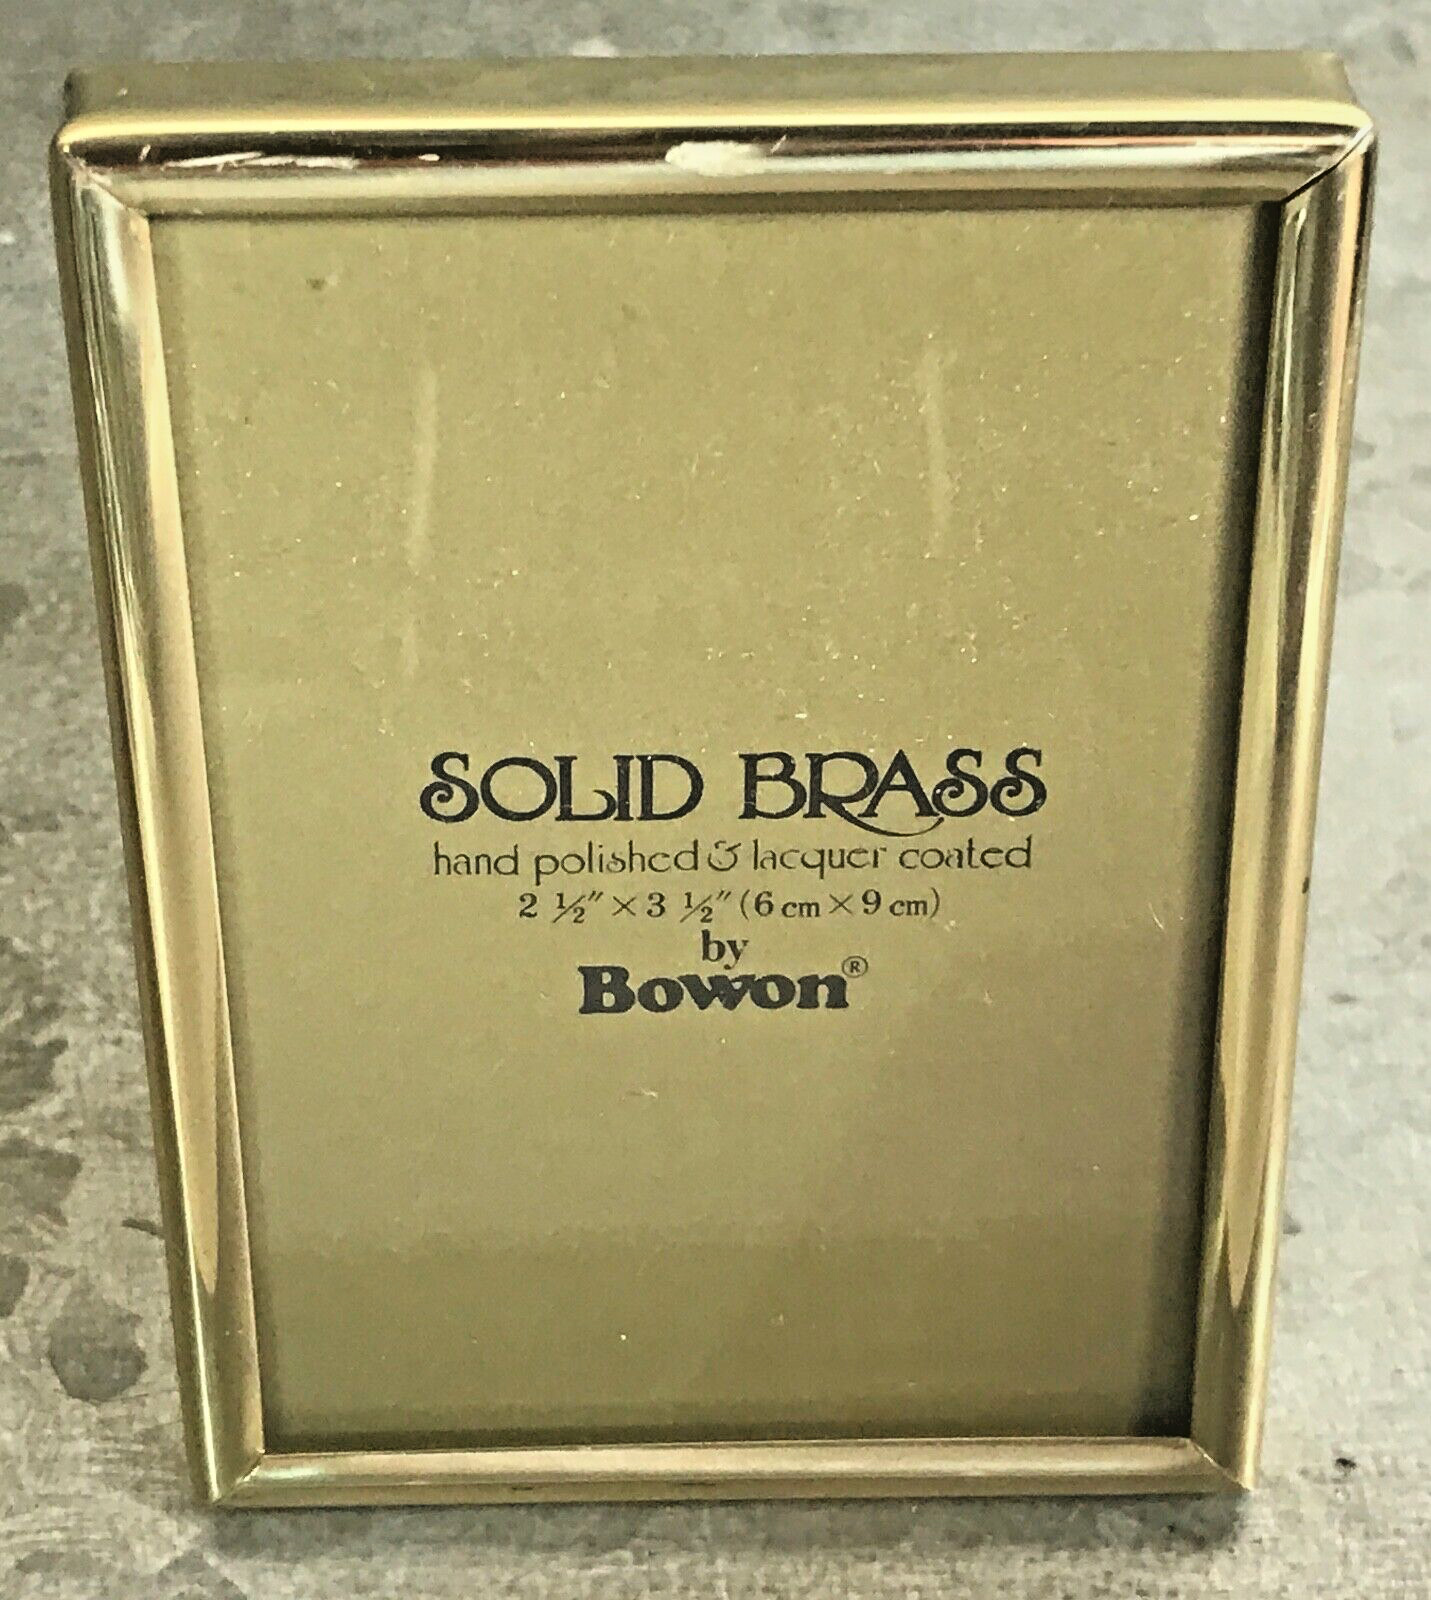 Vtg Bowon SOLID BRASS Standing 2.5x3.5 Photo FRAME Hand Polished Lacquer Coated